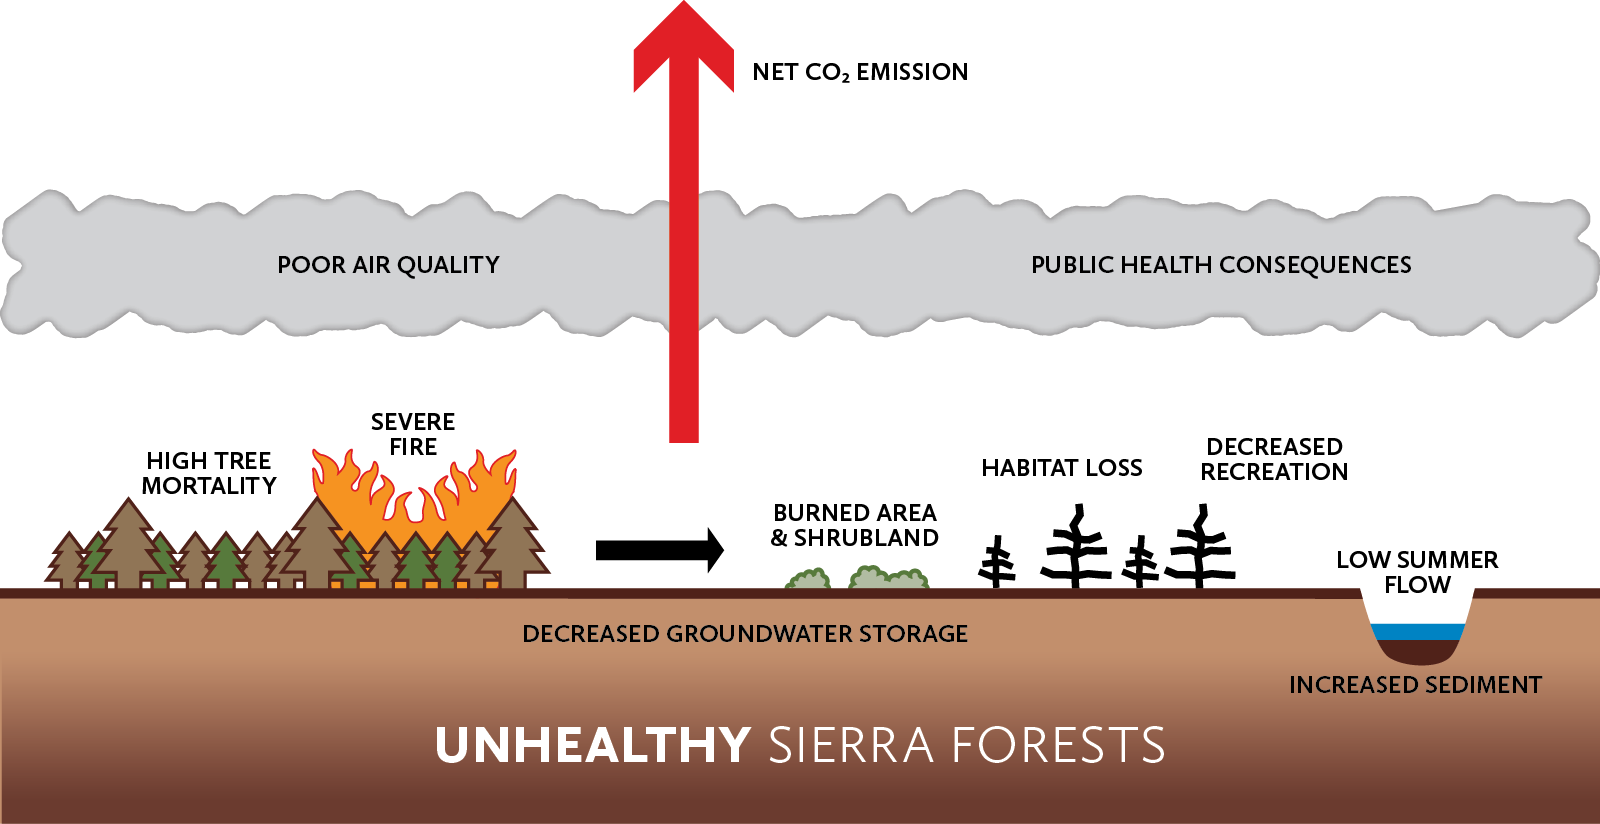 Unhealthy forests are too dense with greater risk for high tree mortality and severe fire. This eventually results in negative impacts: forests converting to burned area and shrubland, habitat loss, decreased recreation, poor air quality, public health consequences, net carbon dioxide emission, decreased groundwater storage, increased sedimentation in rivers, and low summer water flow.